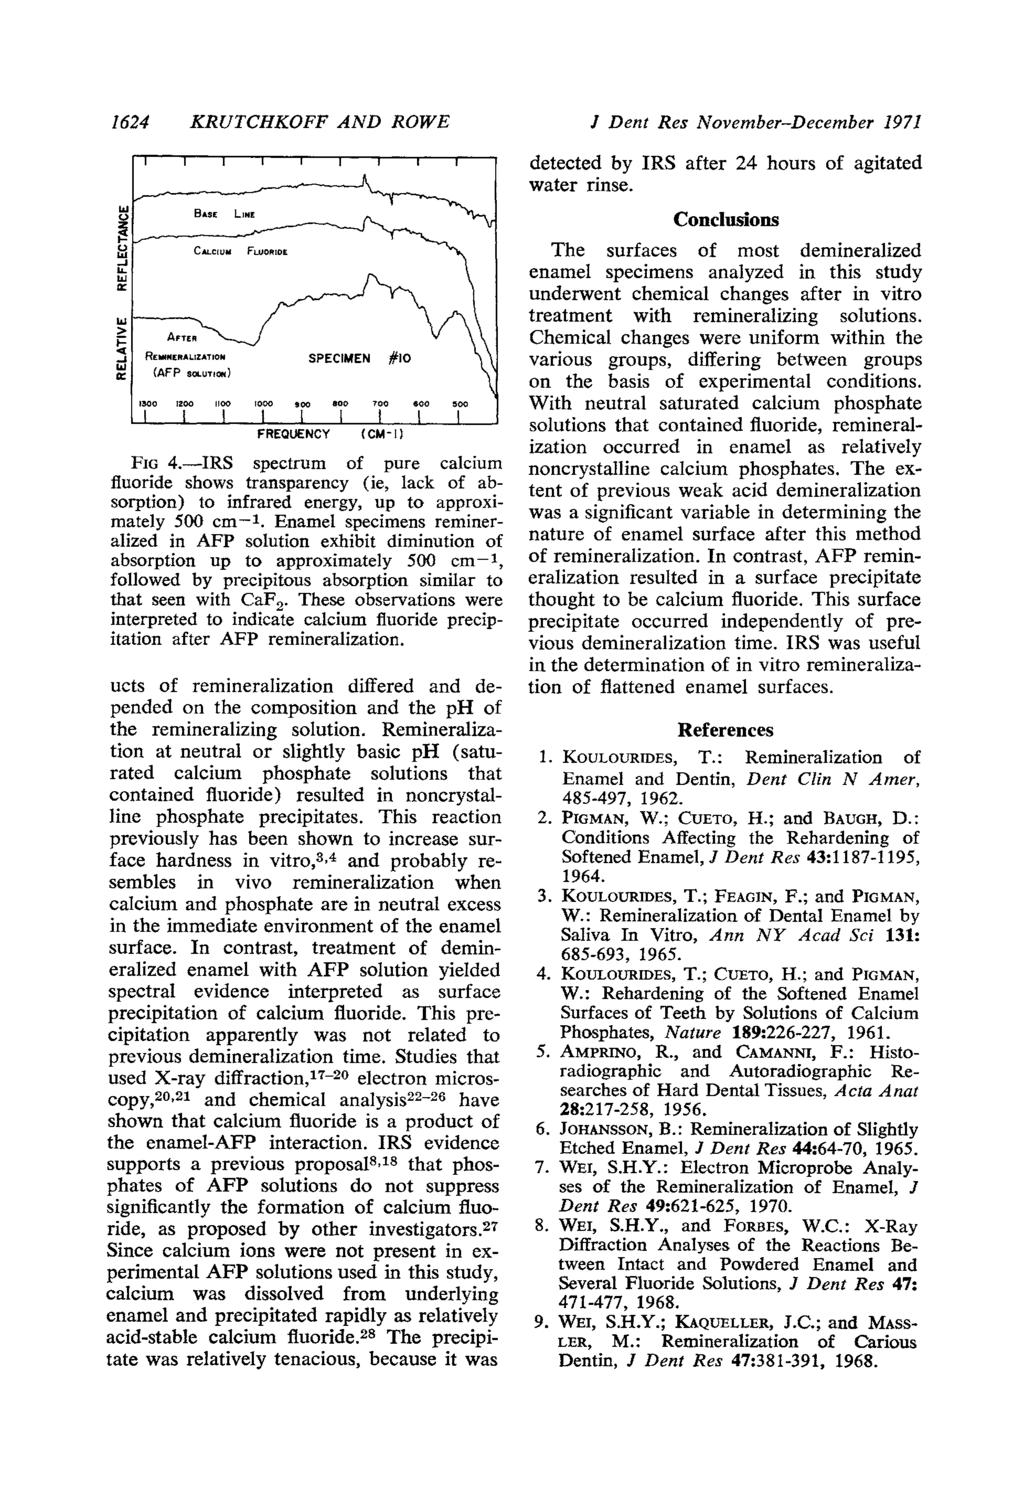 1624 KRUTCHKOFF AND ROWE FIG 4.-IRS spectrum of pure calcium fluoride shows transparency (ie, lack of absorption) to infrared energy, up to approximately 500 cm-1.